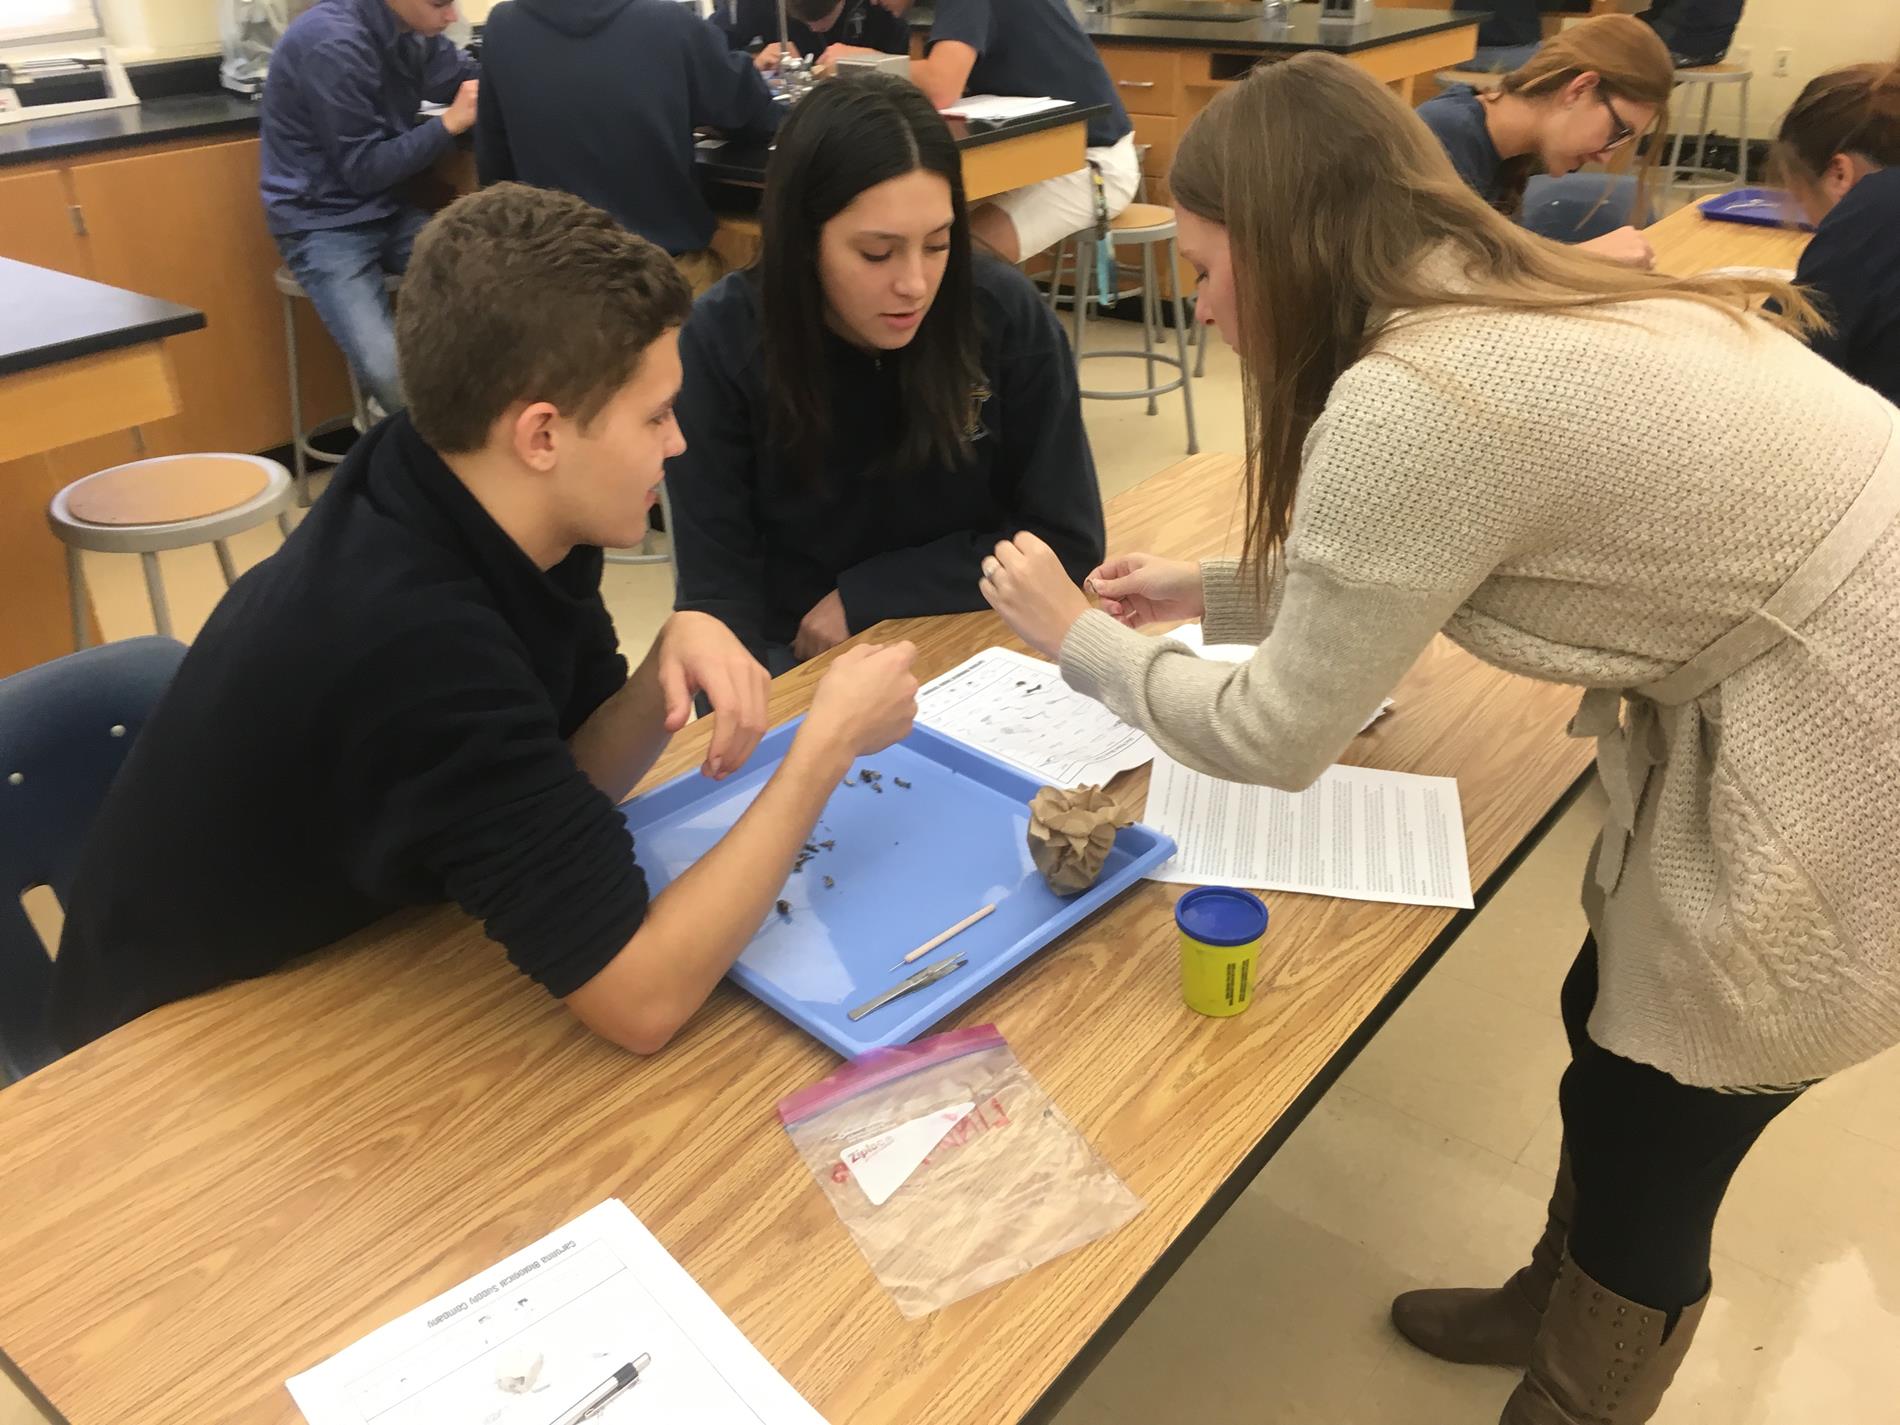 Teacher discussing lab activity with students in science class